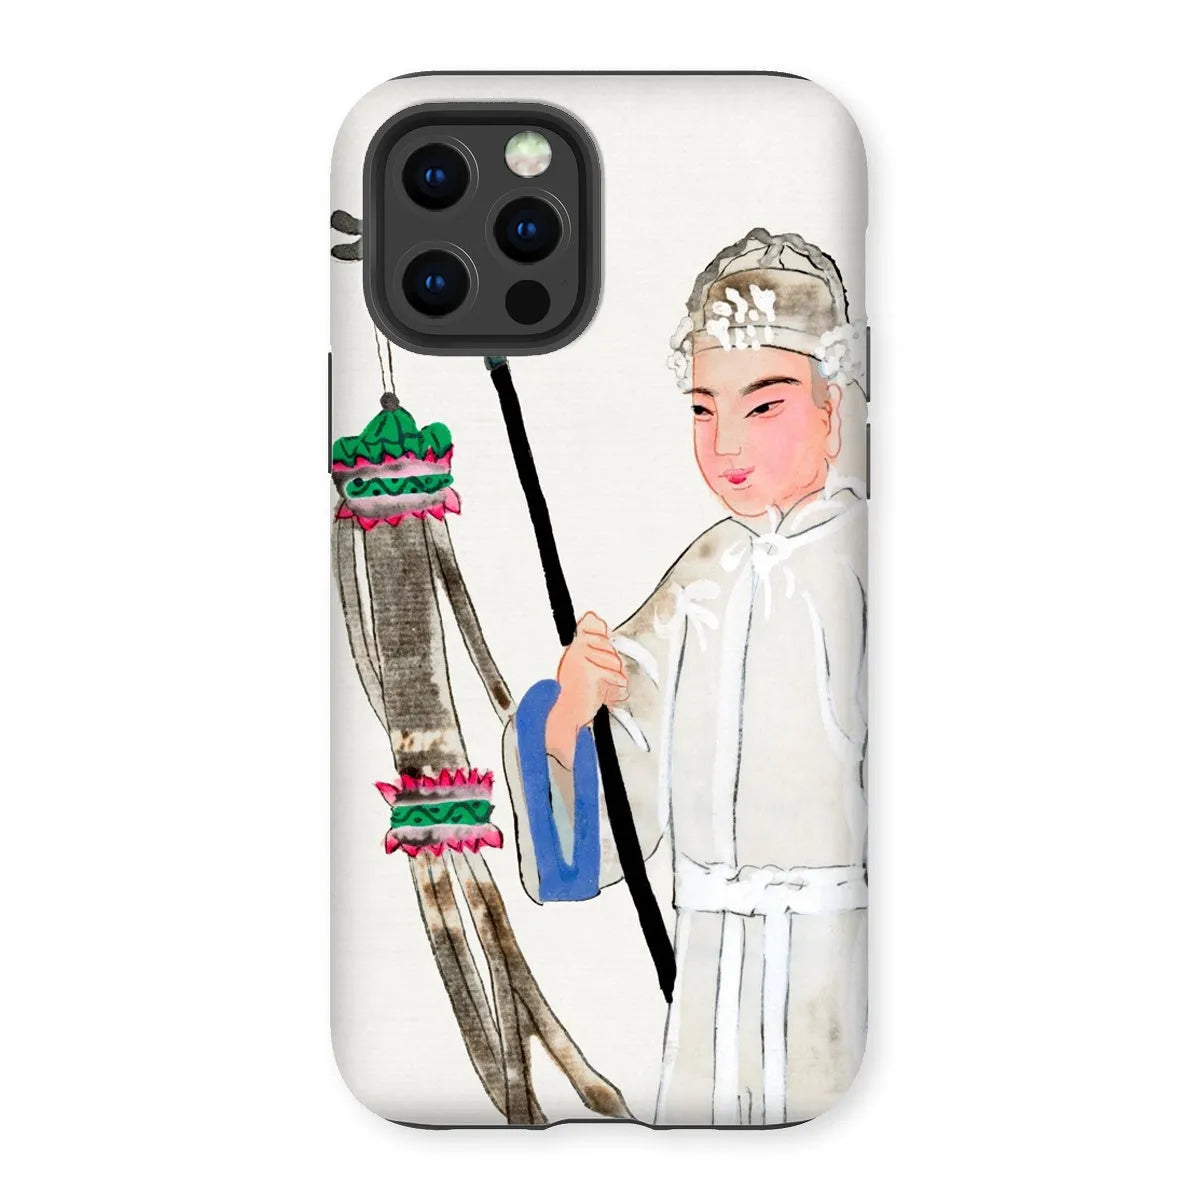 Man In Mourning - Chinese Historical Art Phone Case - Iphone 12 Pro / Matte - Mobile Phone Cases - Aesthetic Art